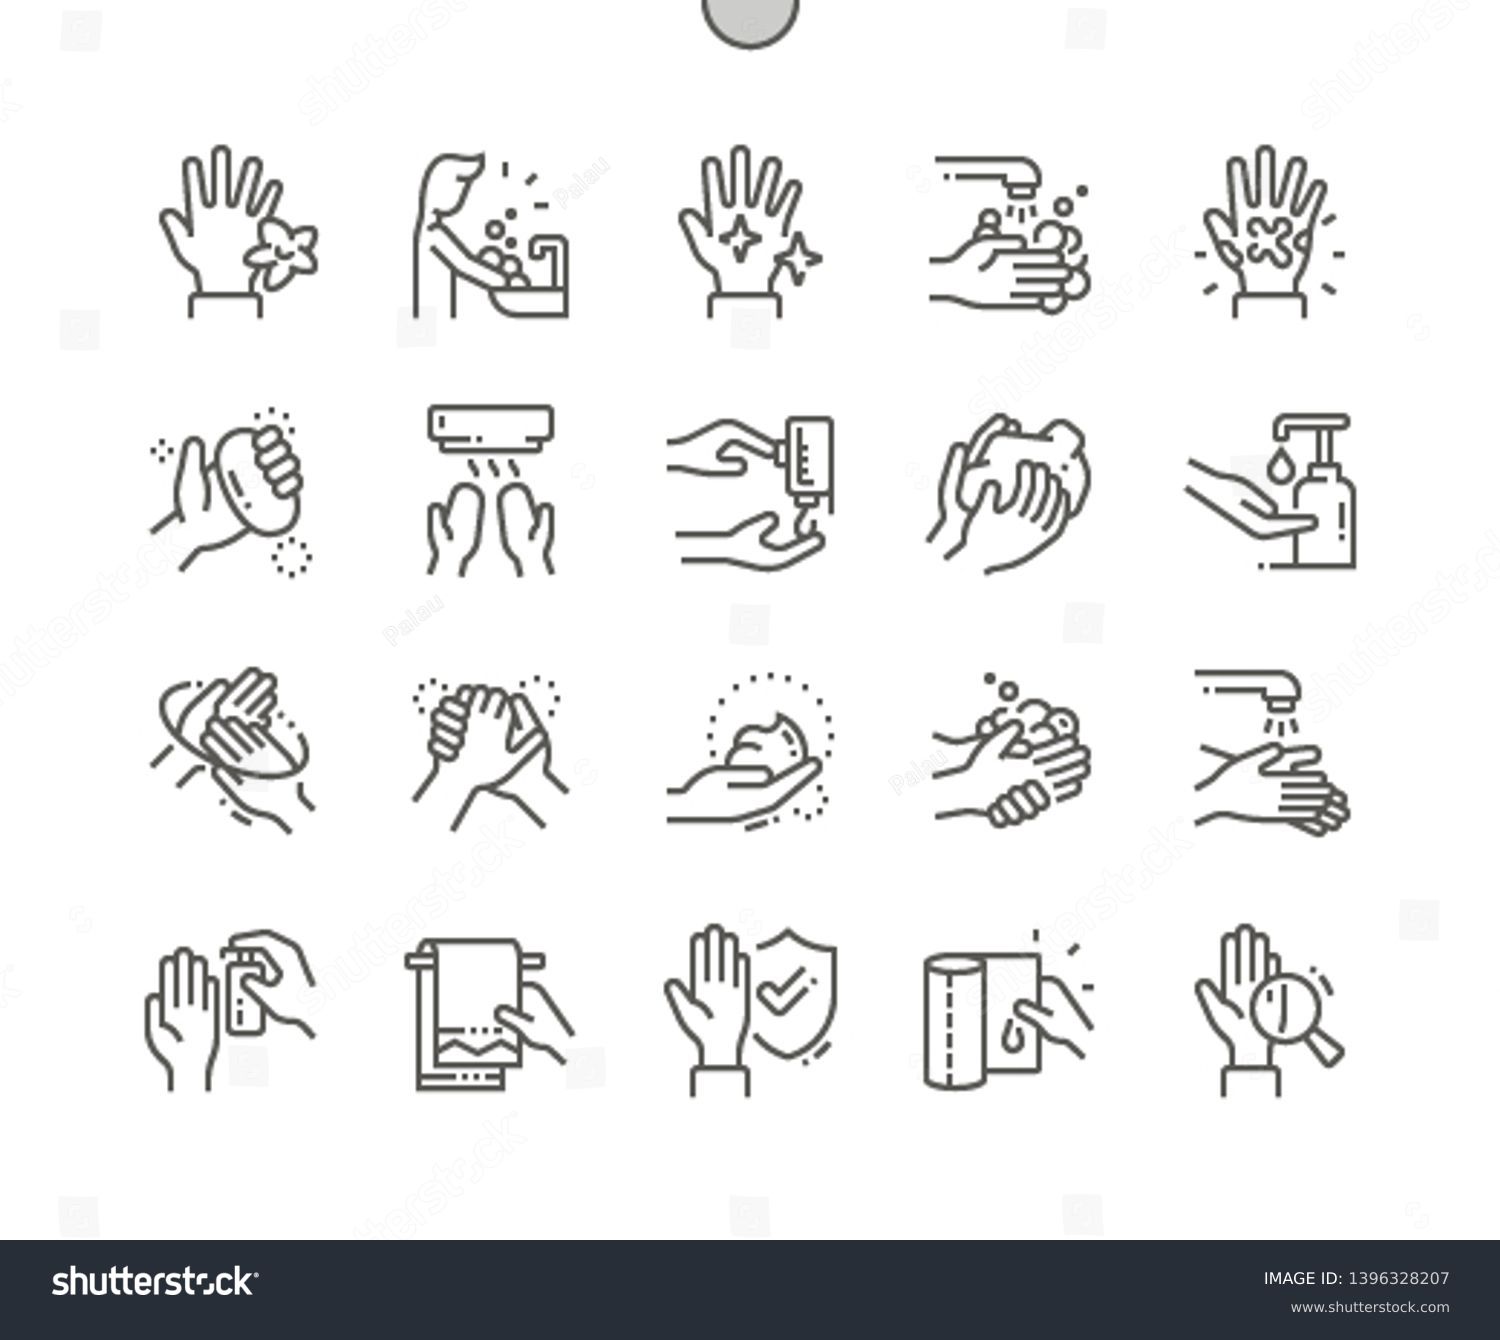 SVG of Hand hygiene Well-crafted Pixel Perfect Vector Thin Line Icons 30 2x Grid for Web Graphics and Apps. Simple Minimal Pictogram svg